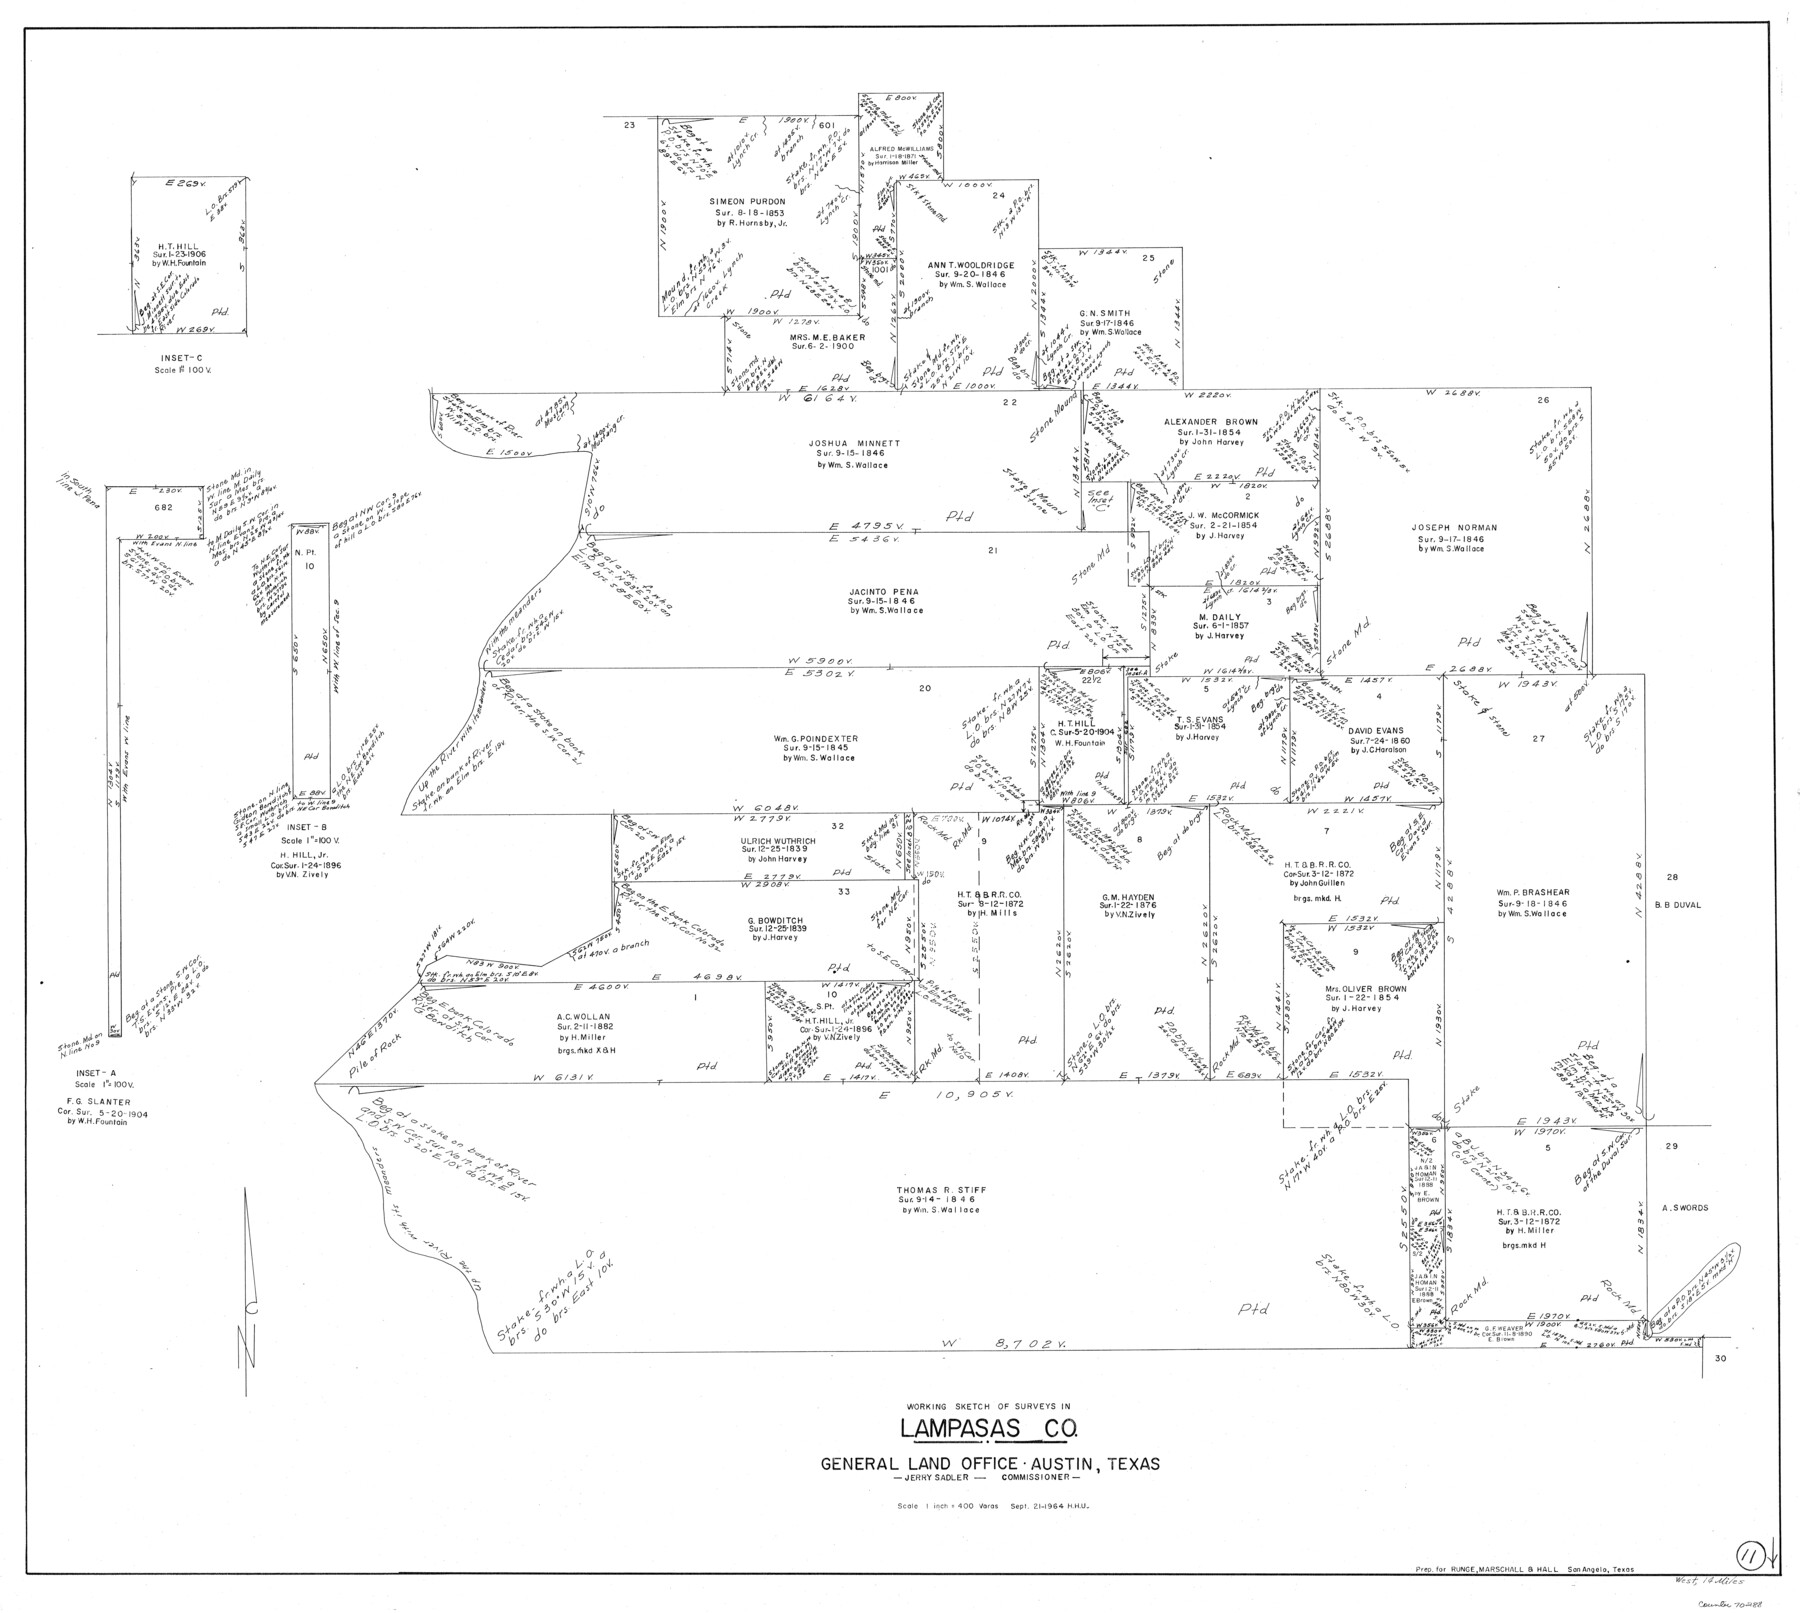 70288, Lampasas County Working Sketch 11, General Map Collection